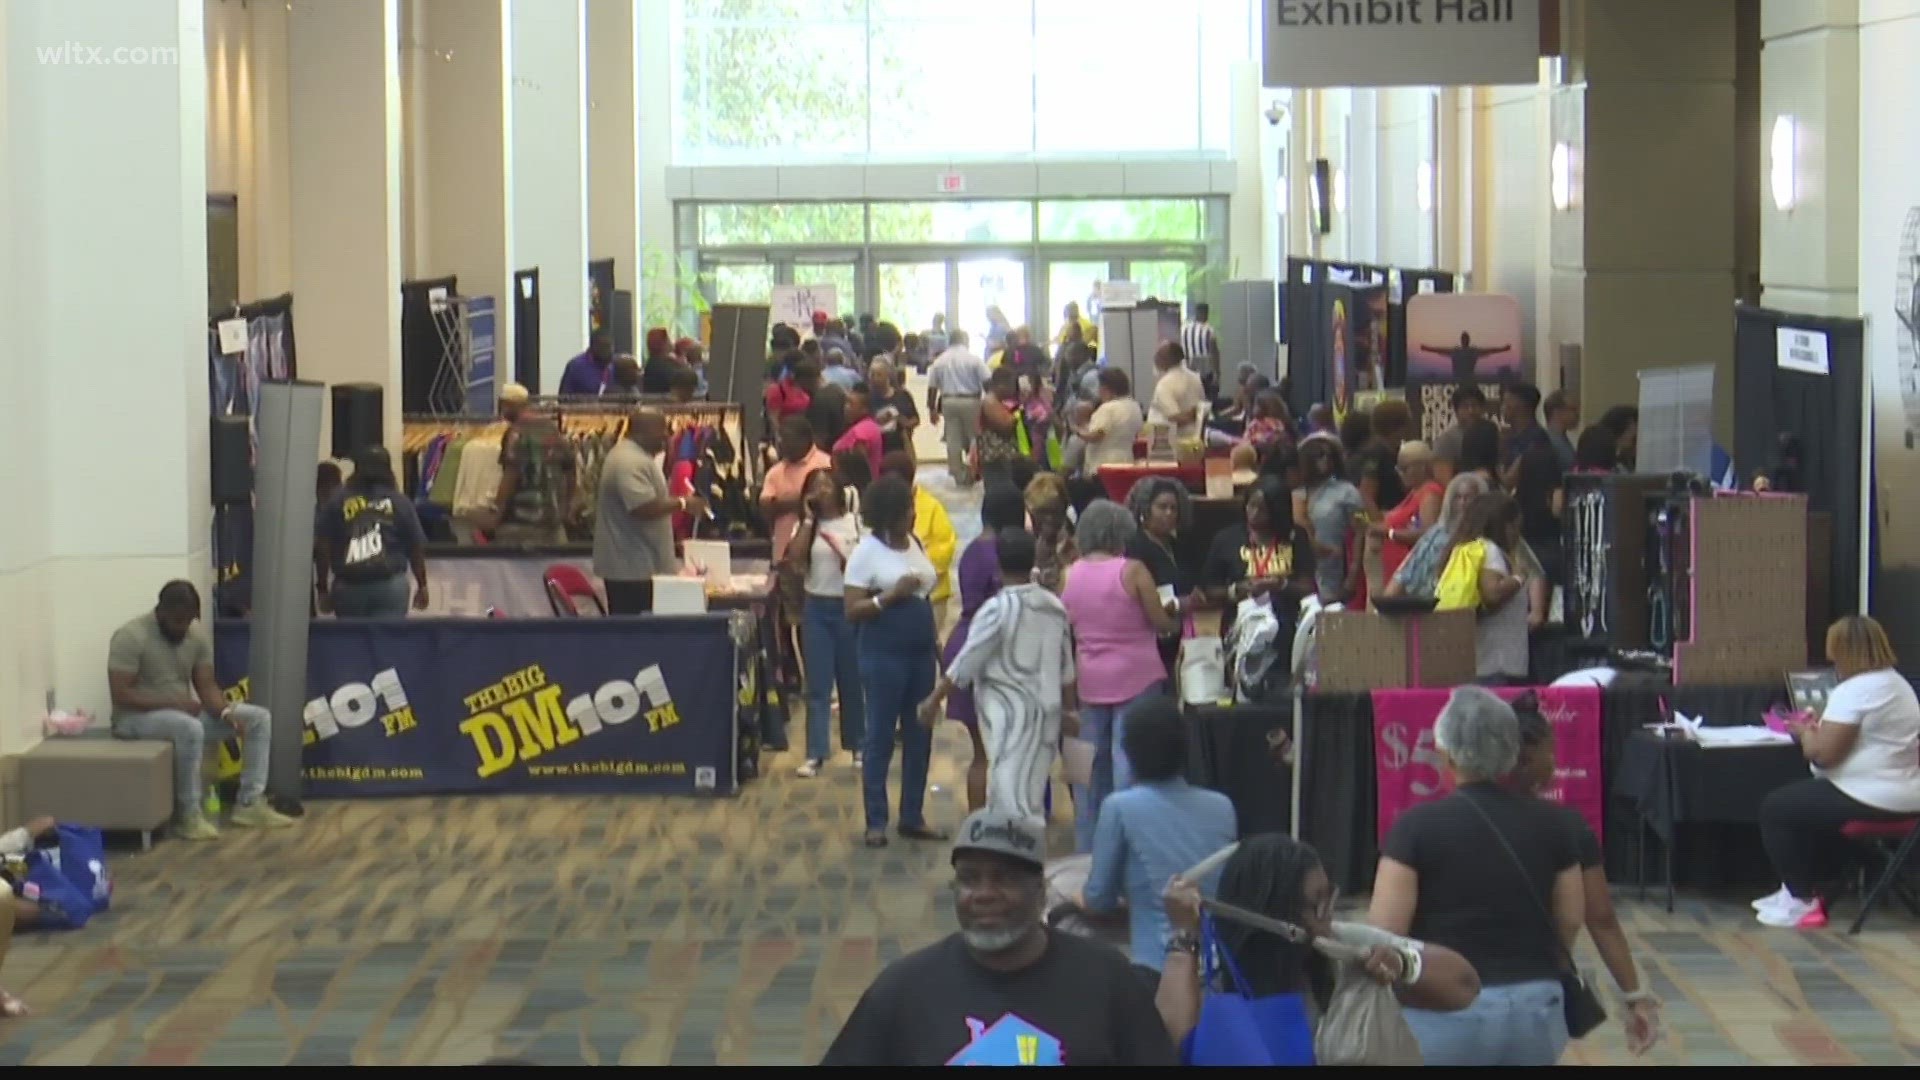 The three-day event allows the community to check out services and products from local African American businesses.